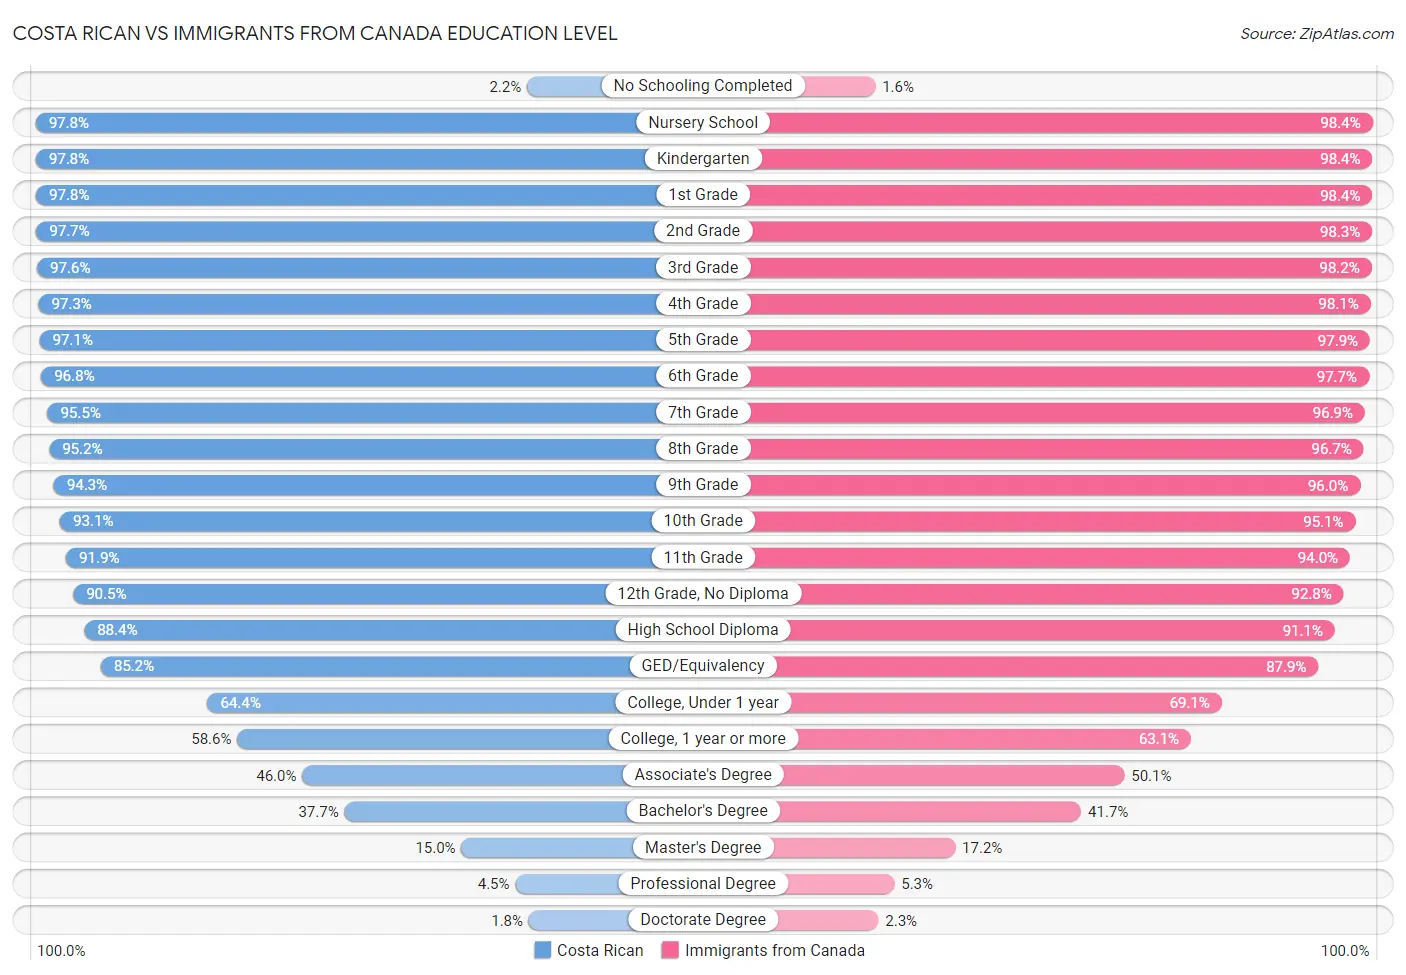 Costa Rican vs Immigrants from Canada Education Level